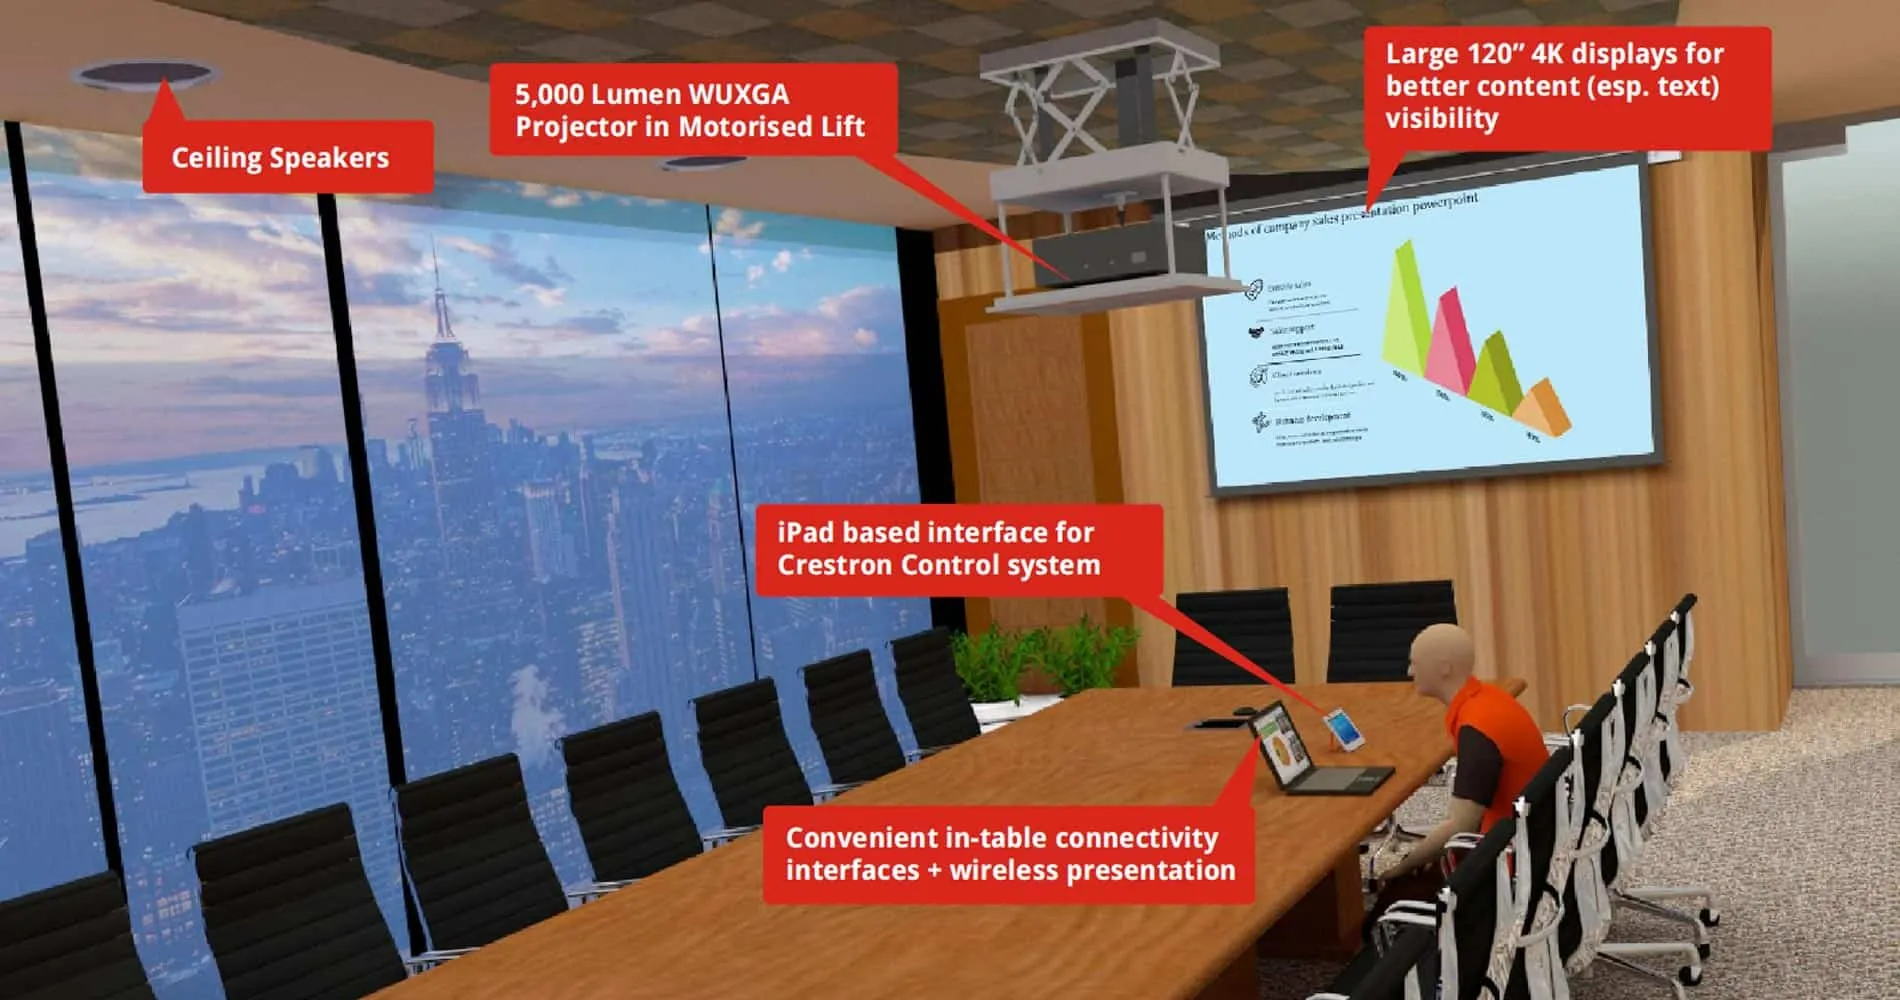 VC ROOM — DUAL DISPLAY + PROJECTOR FOR EXCELLENT CONTENT AND PARTICIPANT VISIBILITY